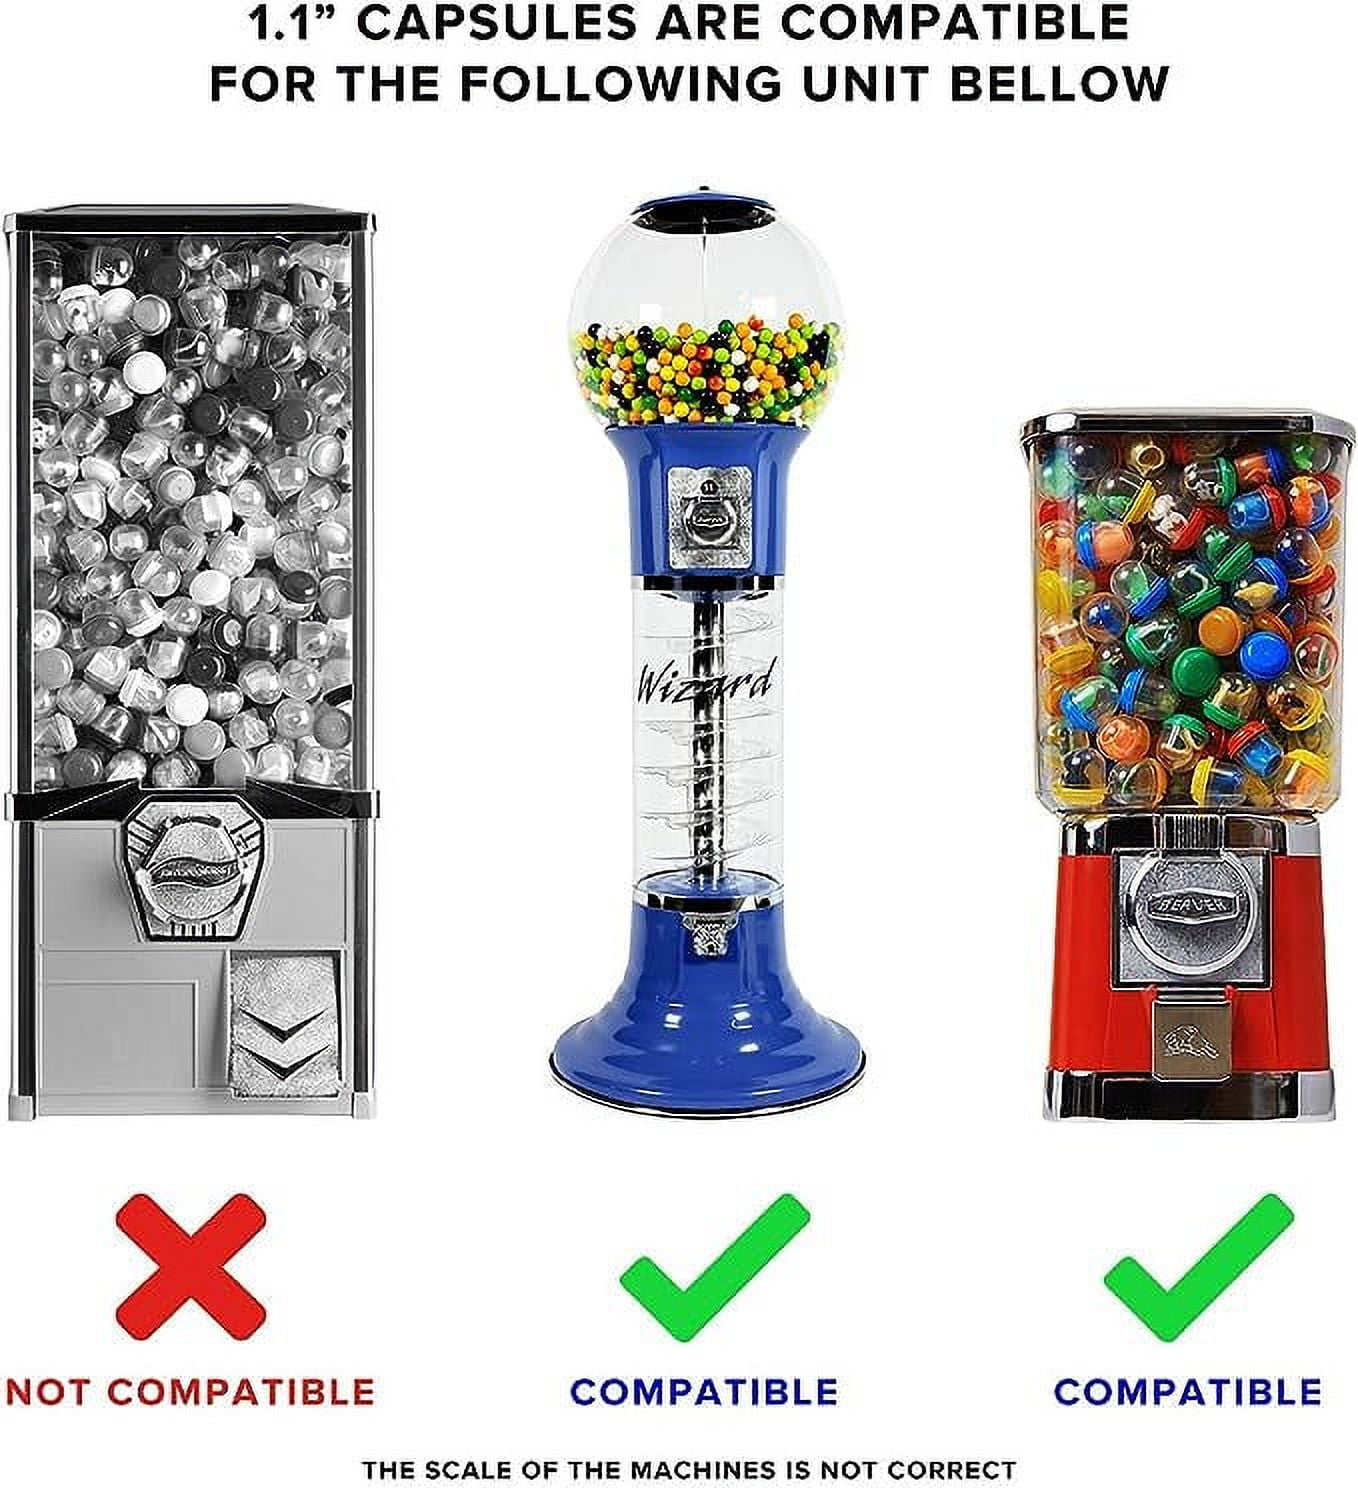 Libima 300 Pcs Gumball Machine Capsules Round Capsules 1.1 1.25 Vending  Machine Capsules Empty Clear Balls Toys Small Gumball Containers for